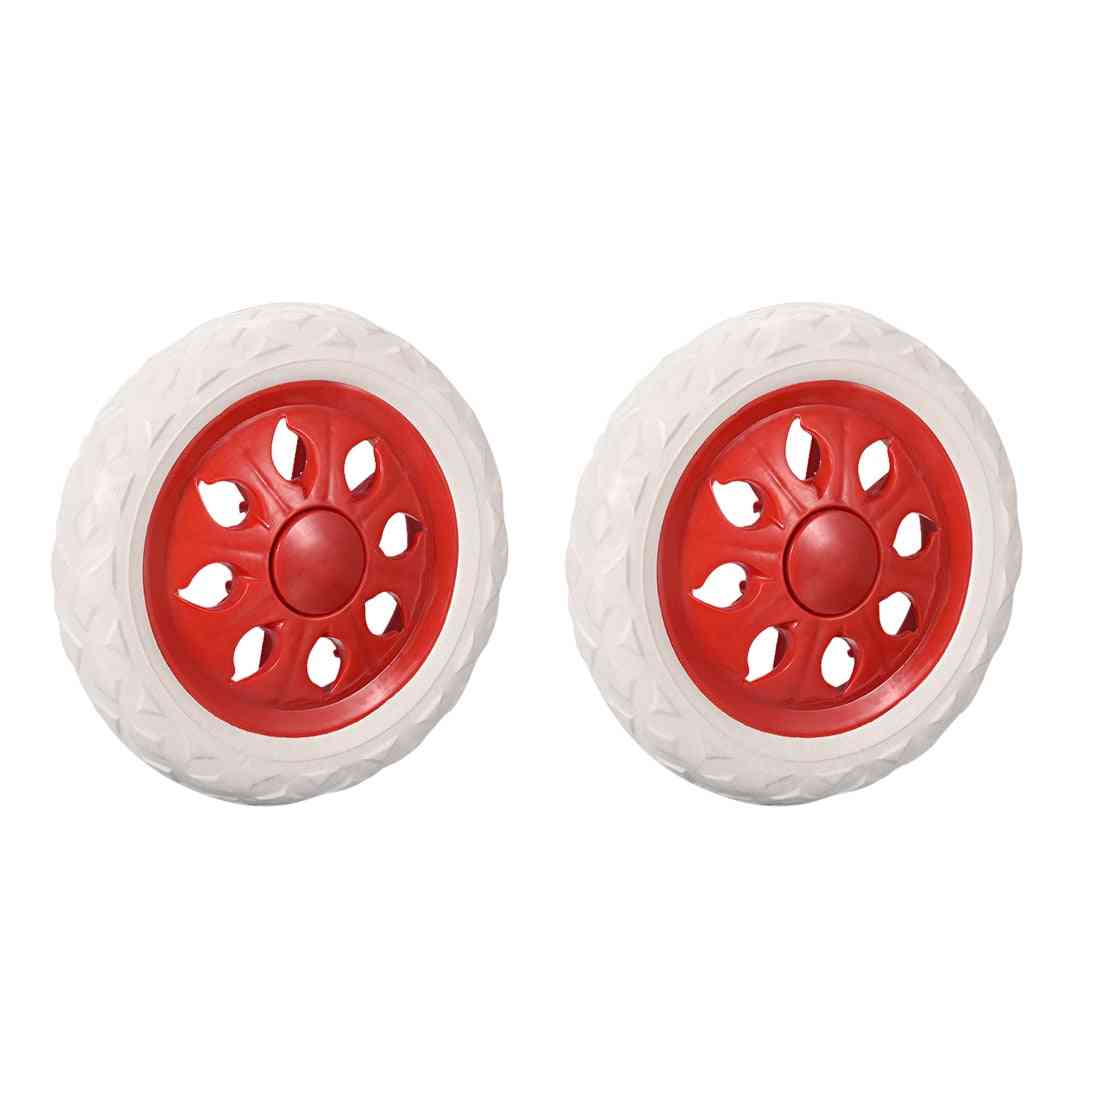 2pcs Shopping Cart Wheels- Trolley Caster Replacement